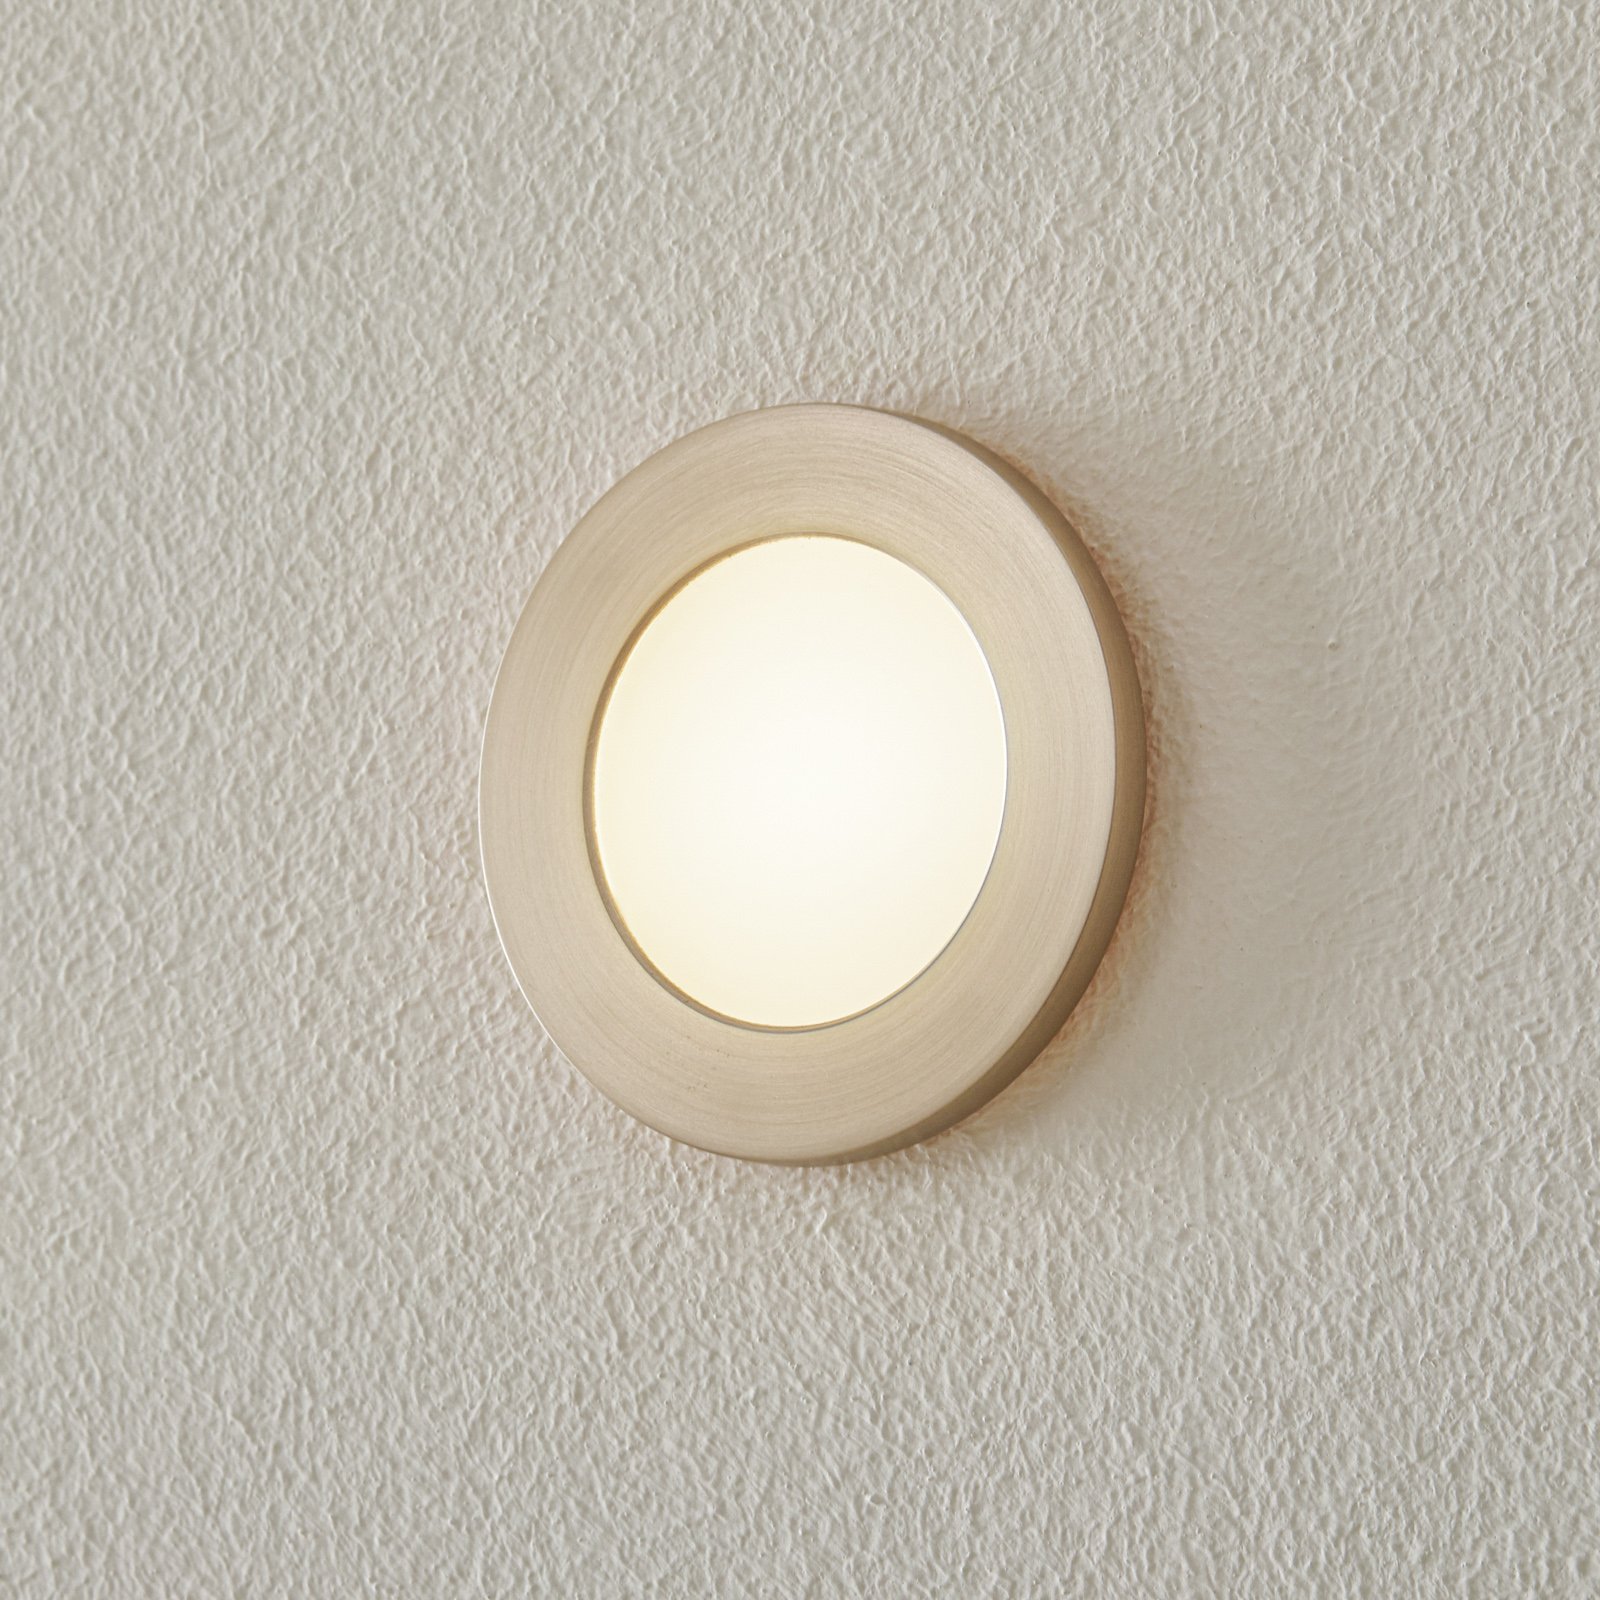 BEGA Accenta wall lamp round frame steel 315lm